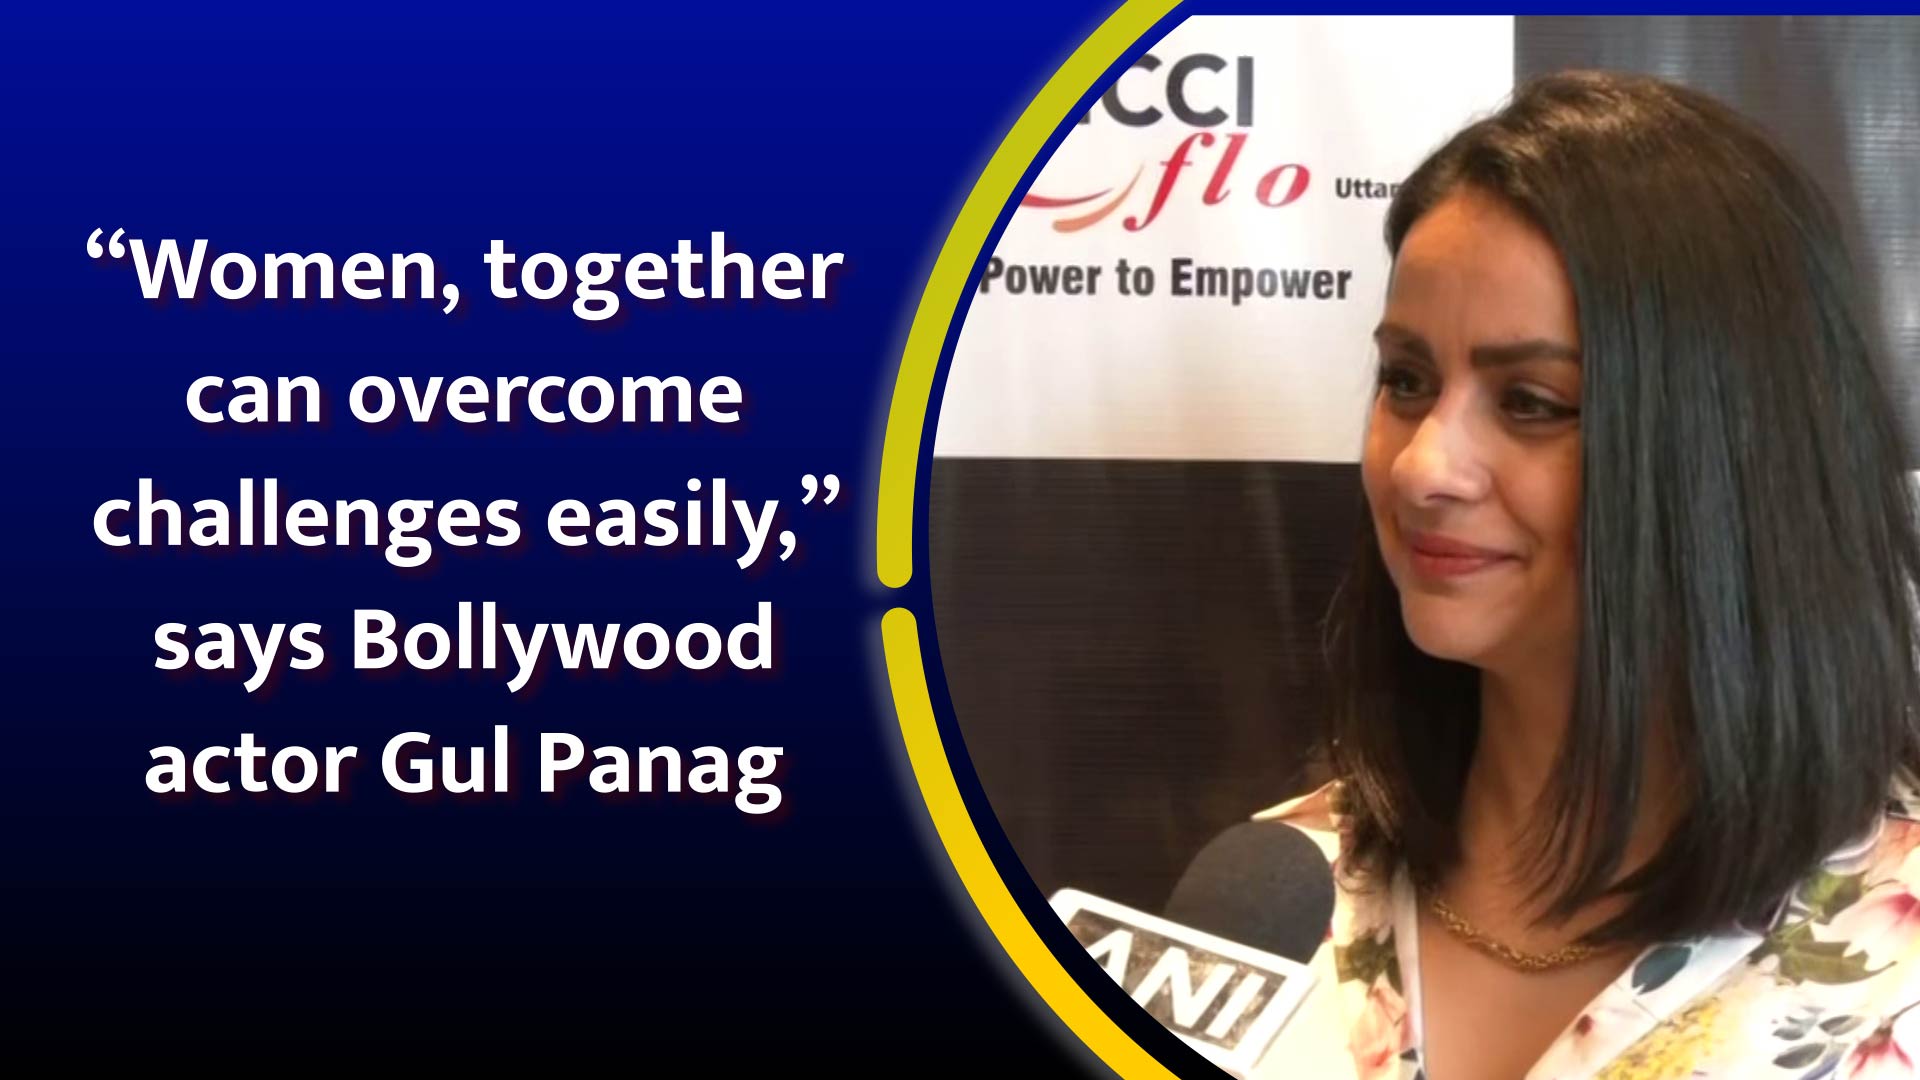 Women, together can overcome challenges easily, says Bollywood actor Gul Panag